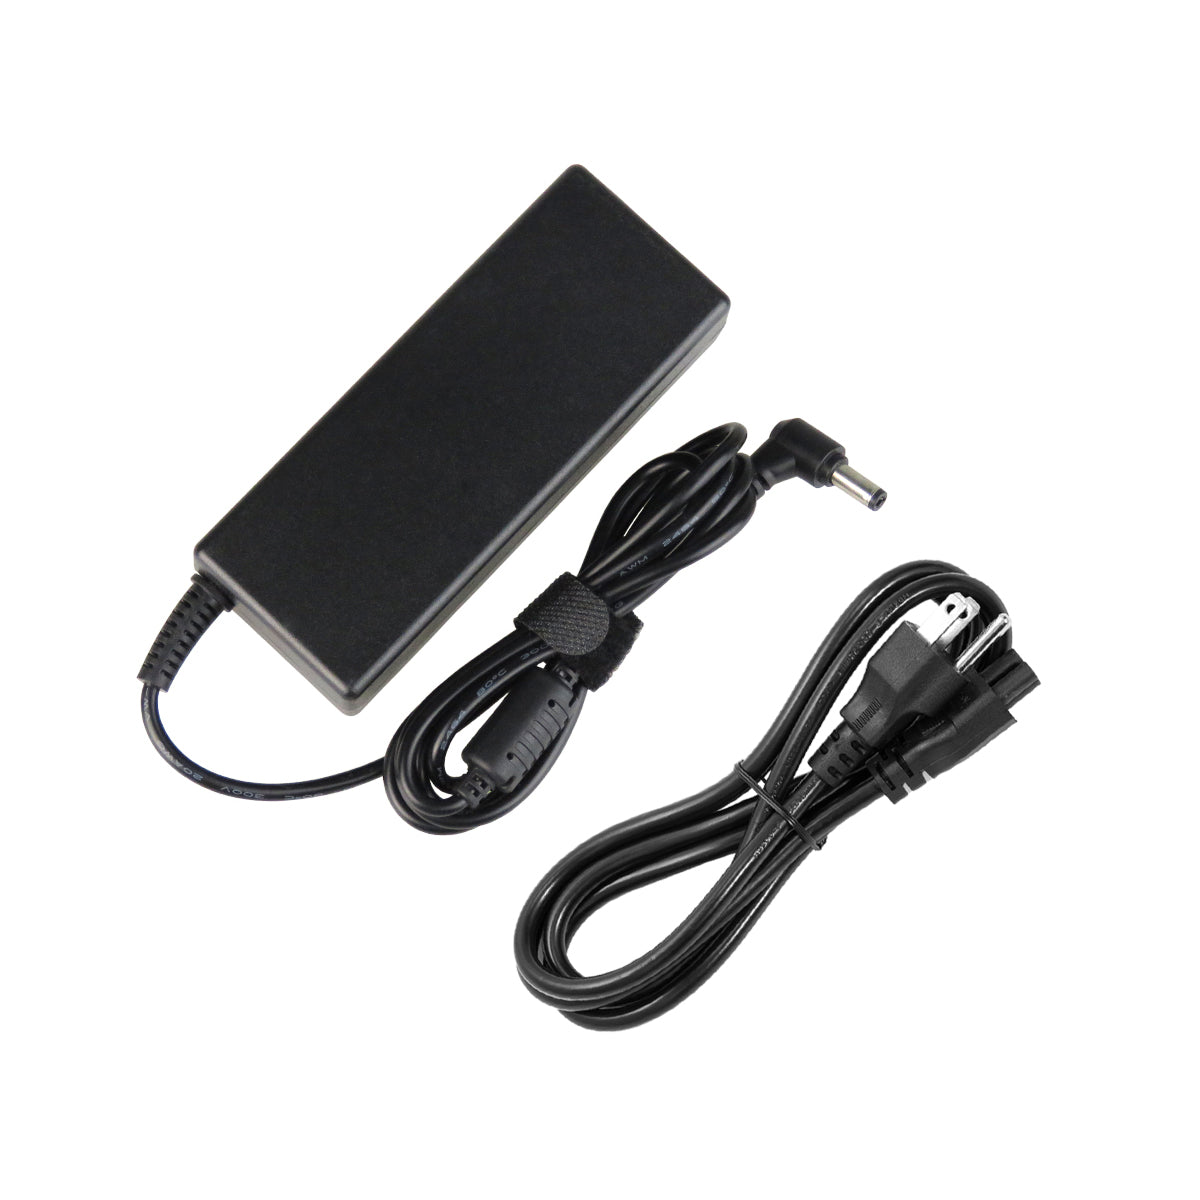 AC Adapter Charger for ASUS U56J Notebook.